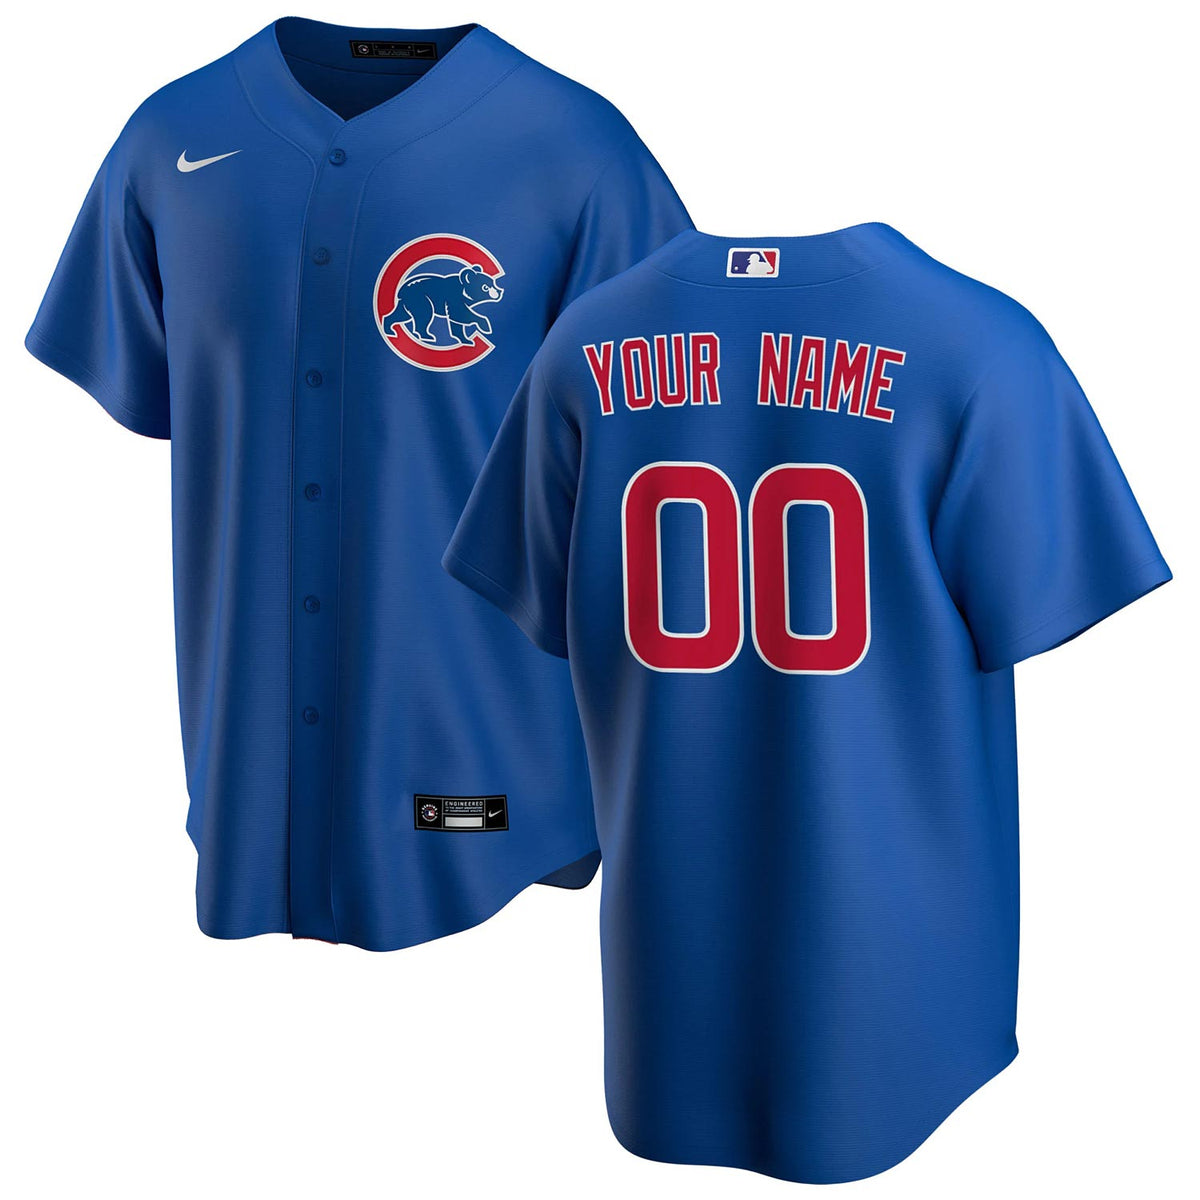 Newborn & Infant Nike Royal Chicago Cubs Official Jersey Romper